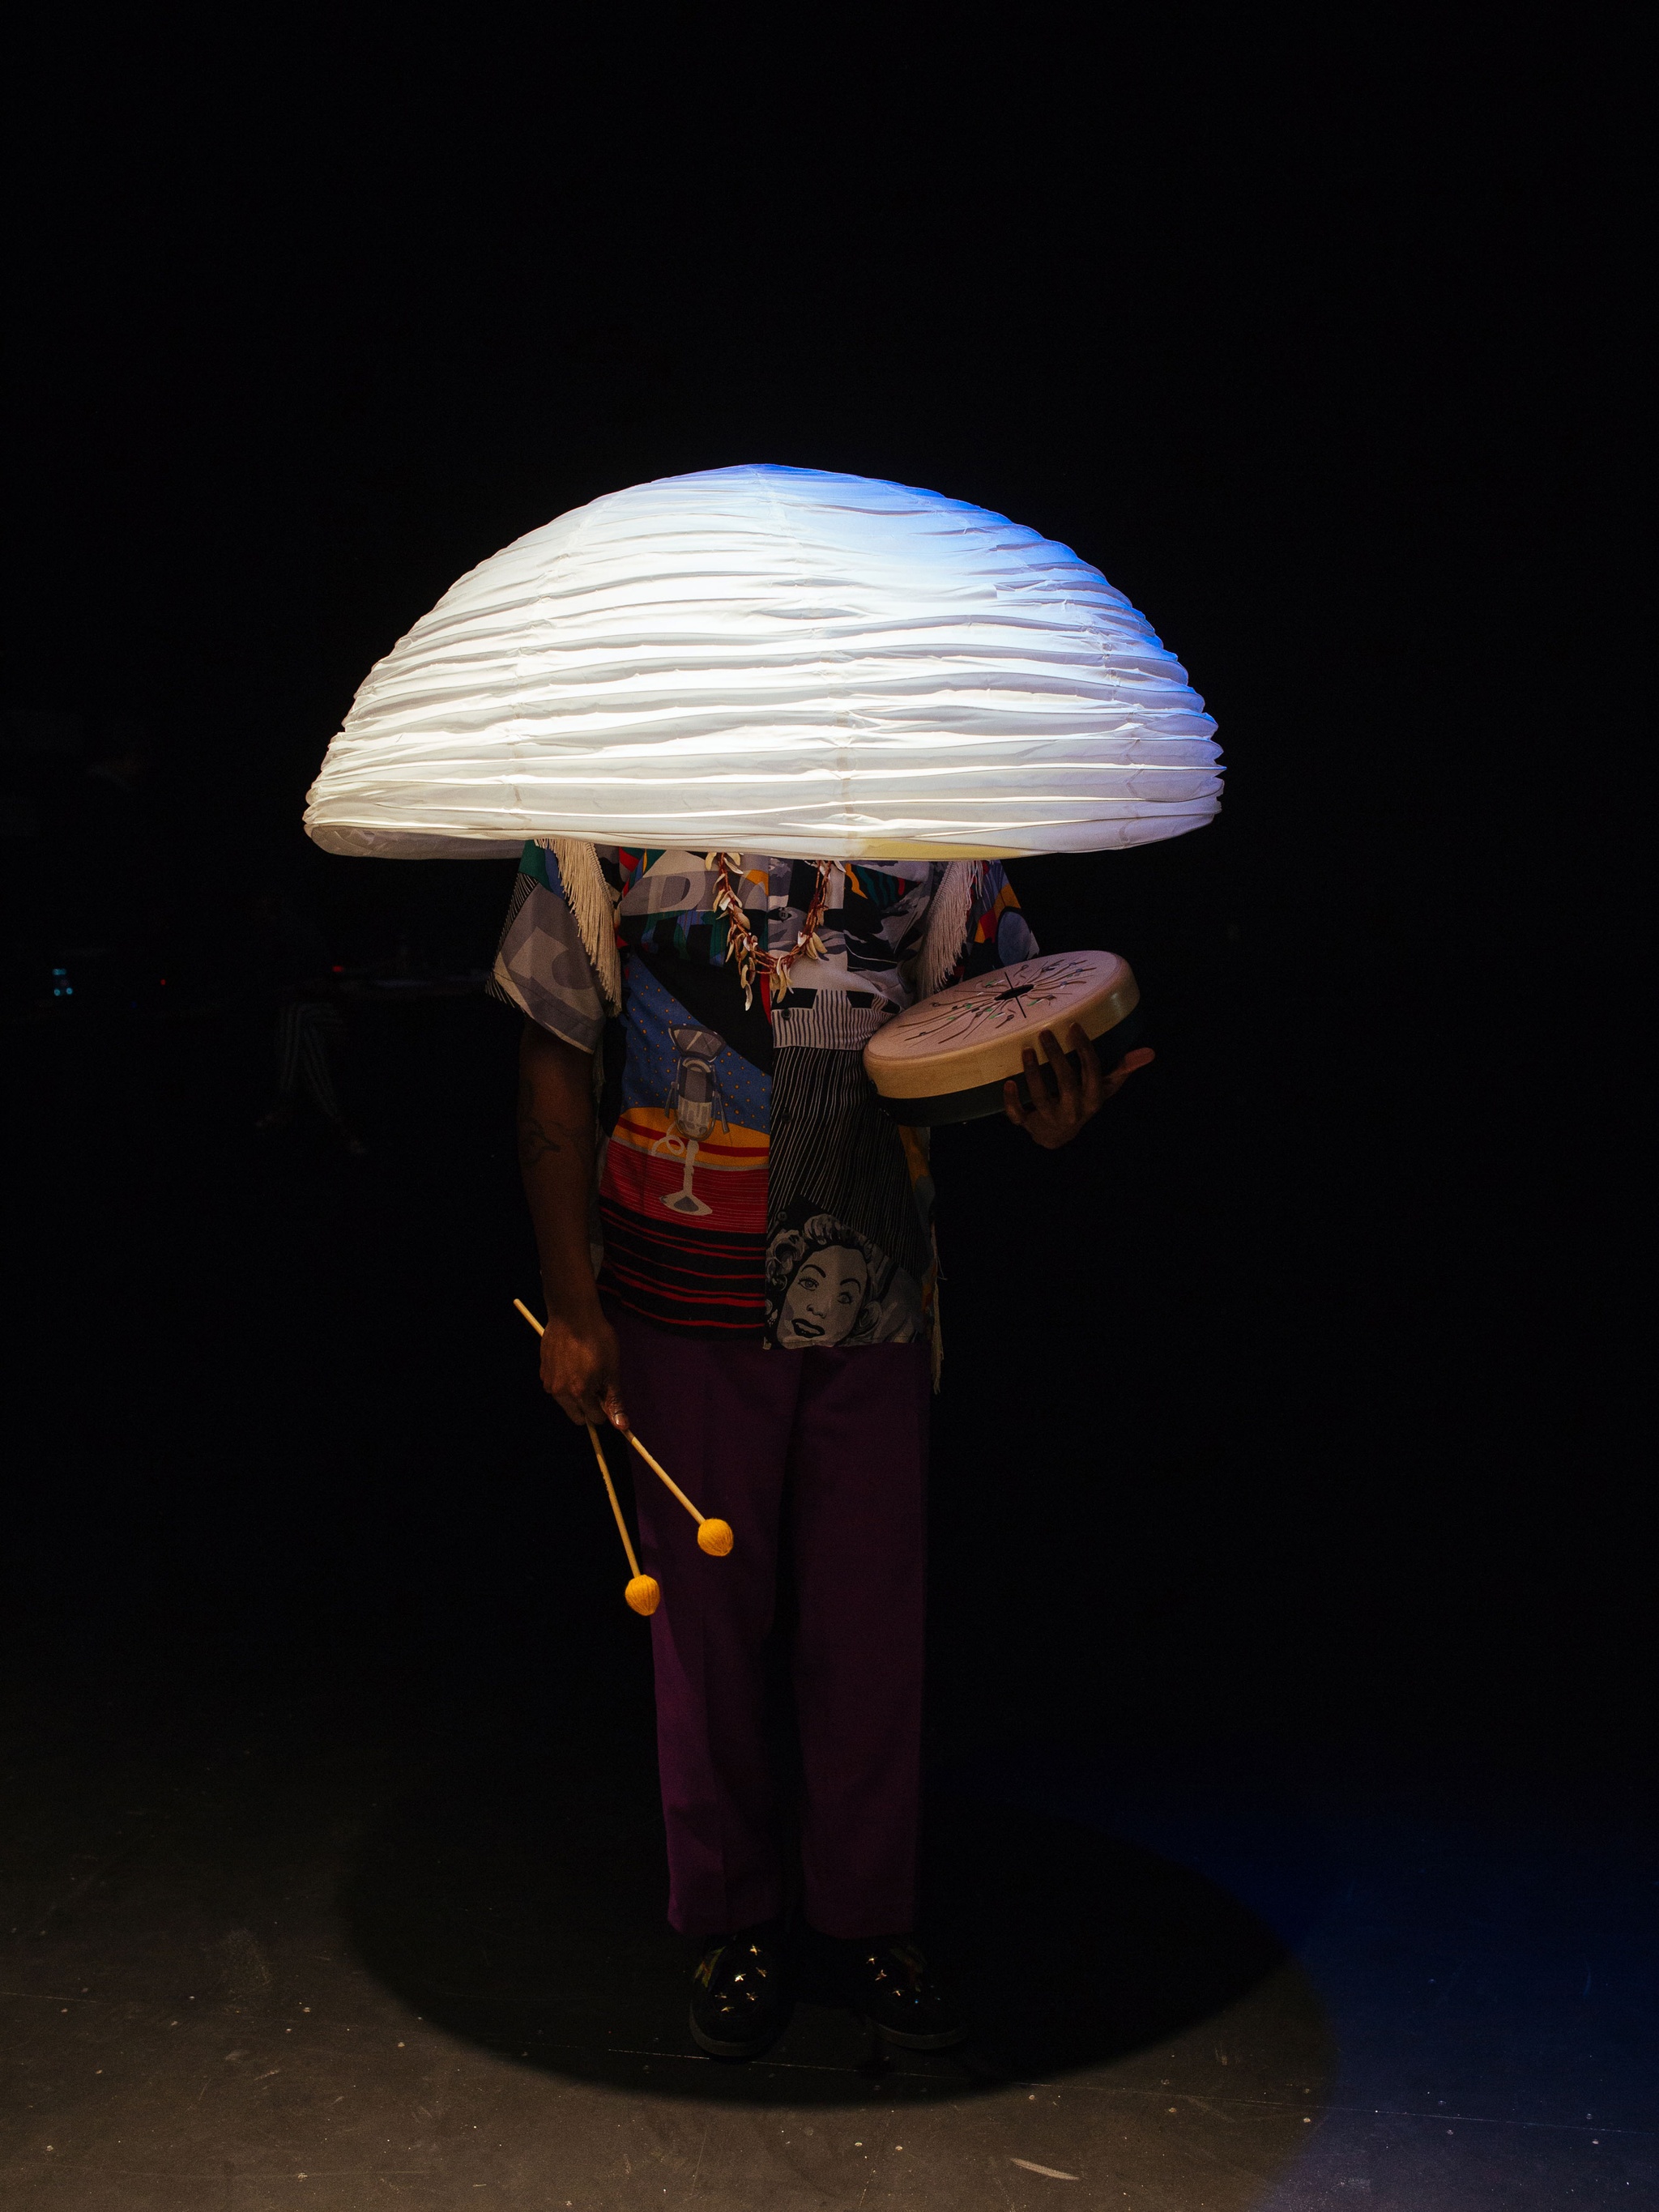 Person under mushroom-like crepe object covering their upper face.